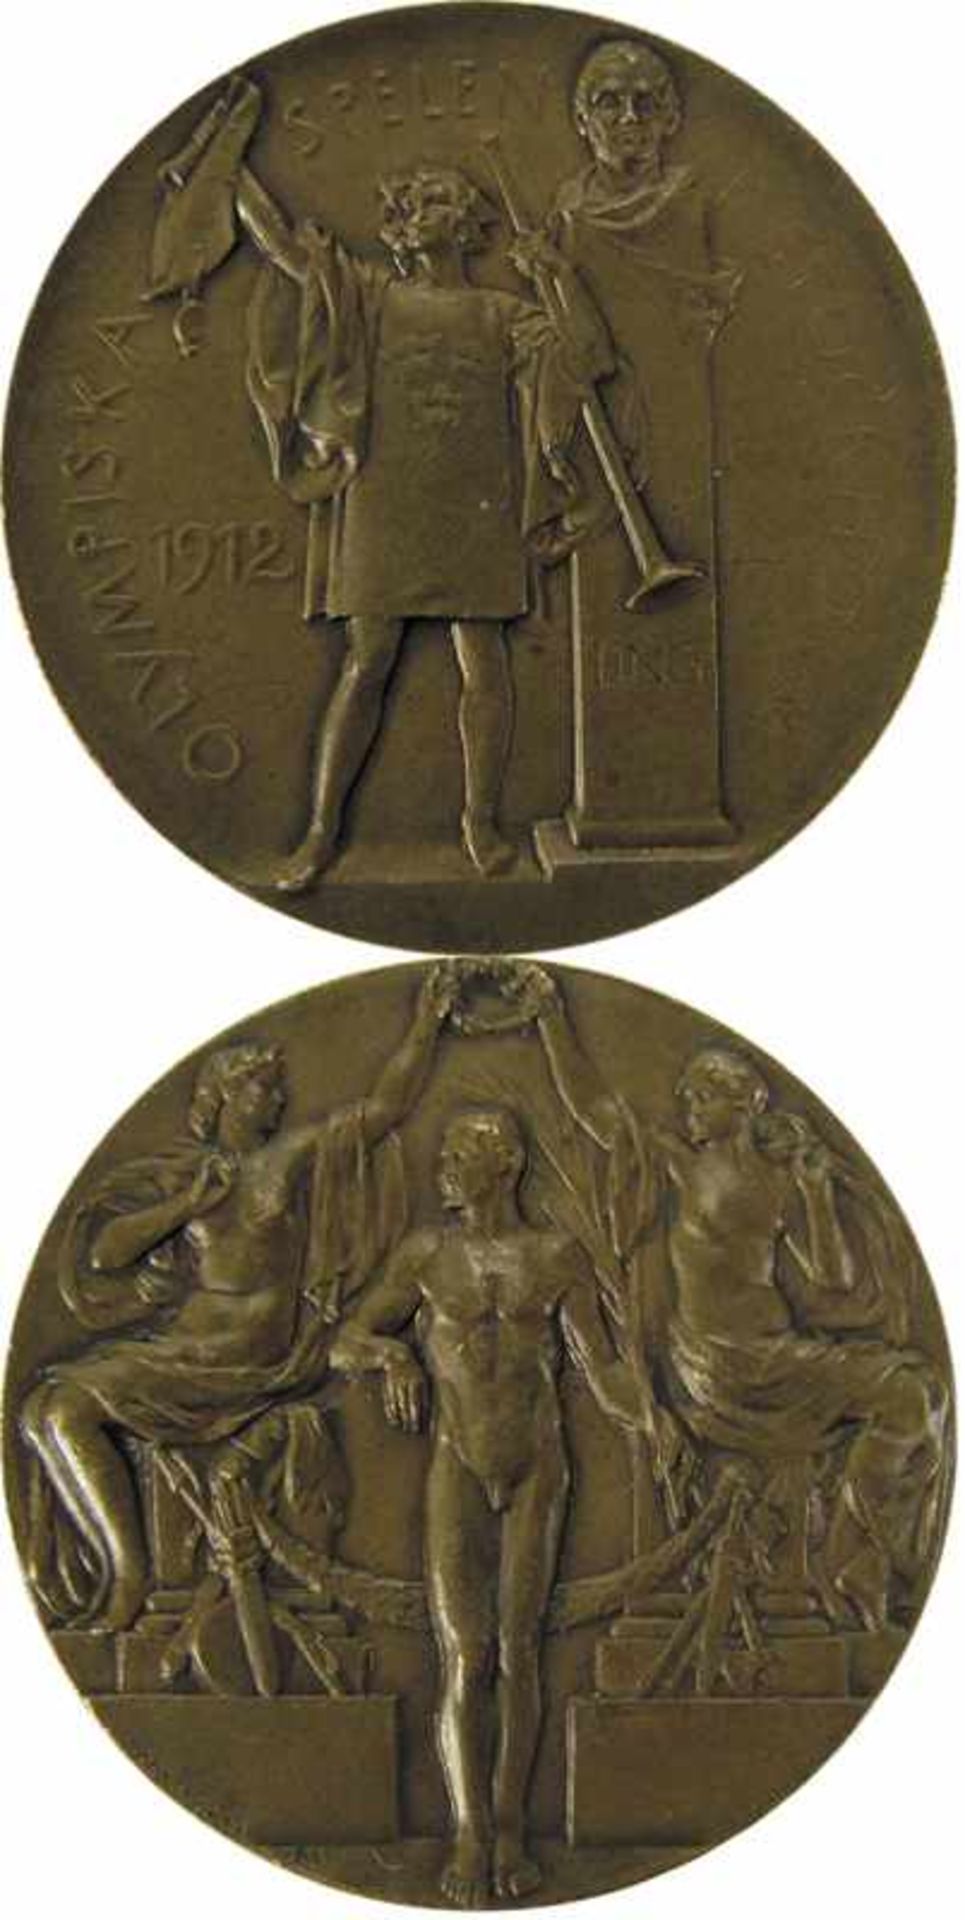 Olympic Games Stockholm 1912. Bronze Medal - Attractive item with relief antique Olympic scenes